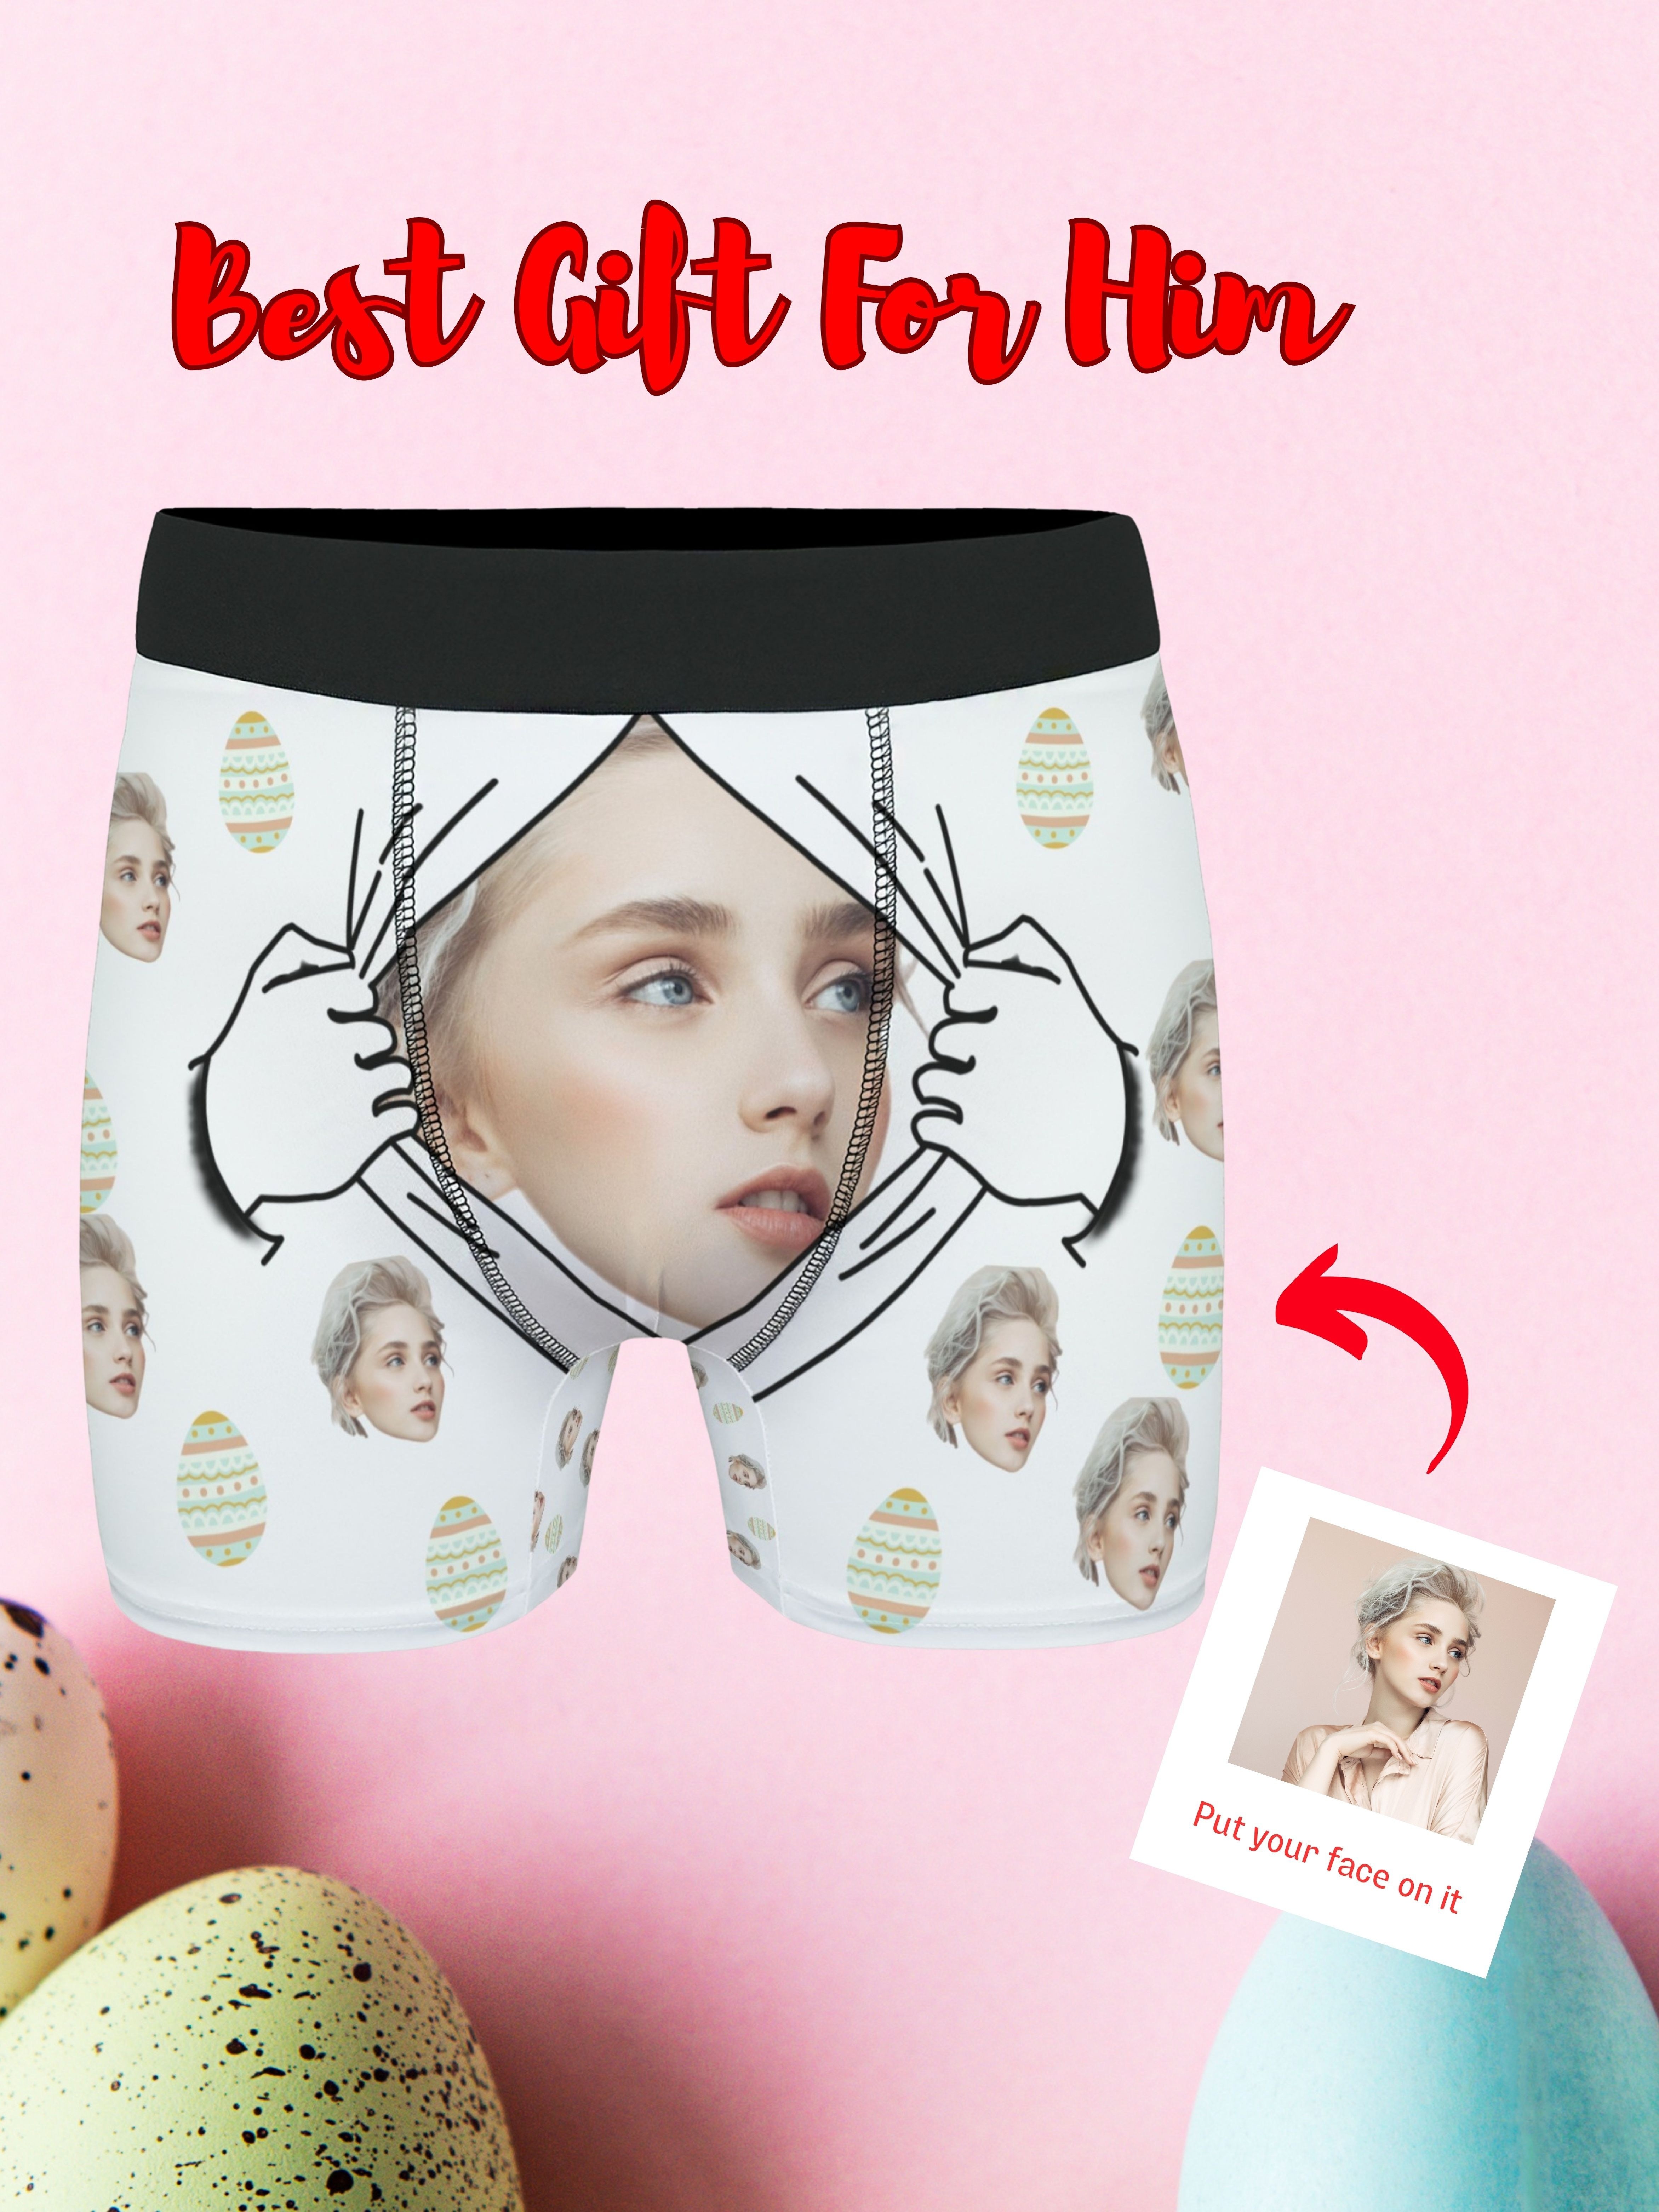 Custom Holiday Panties with Your Photos - Face Undies